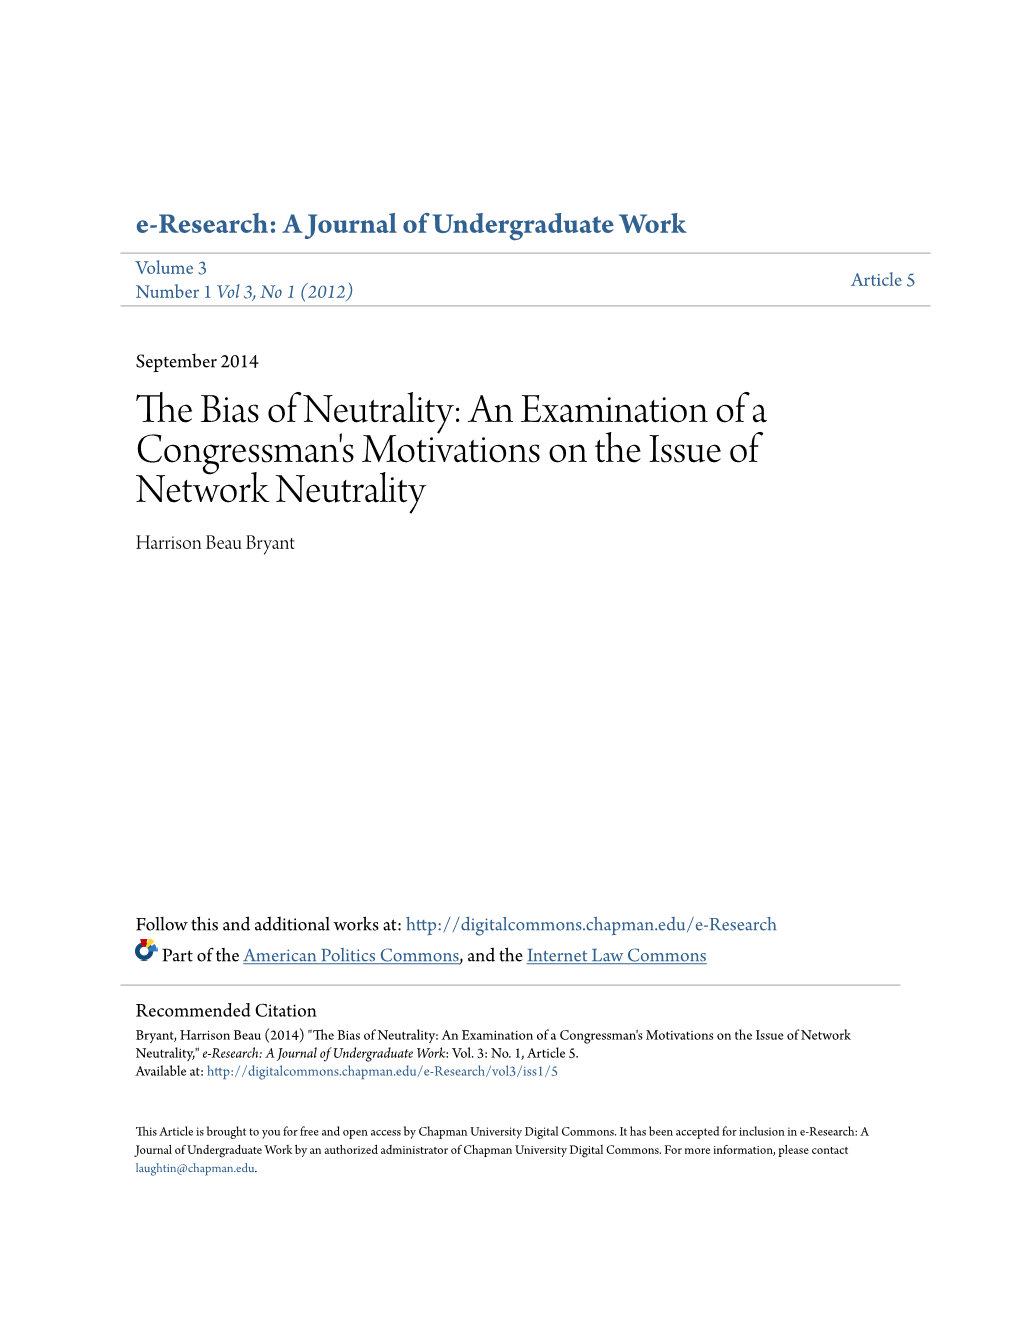 An Examination of a Congressman's Motivations on the Issue of Network Neutrality Harrison Beau Bryant